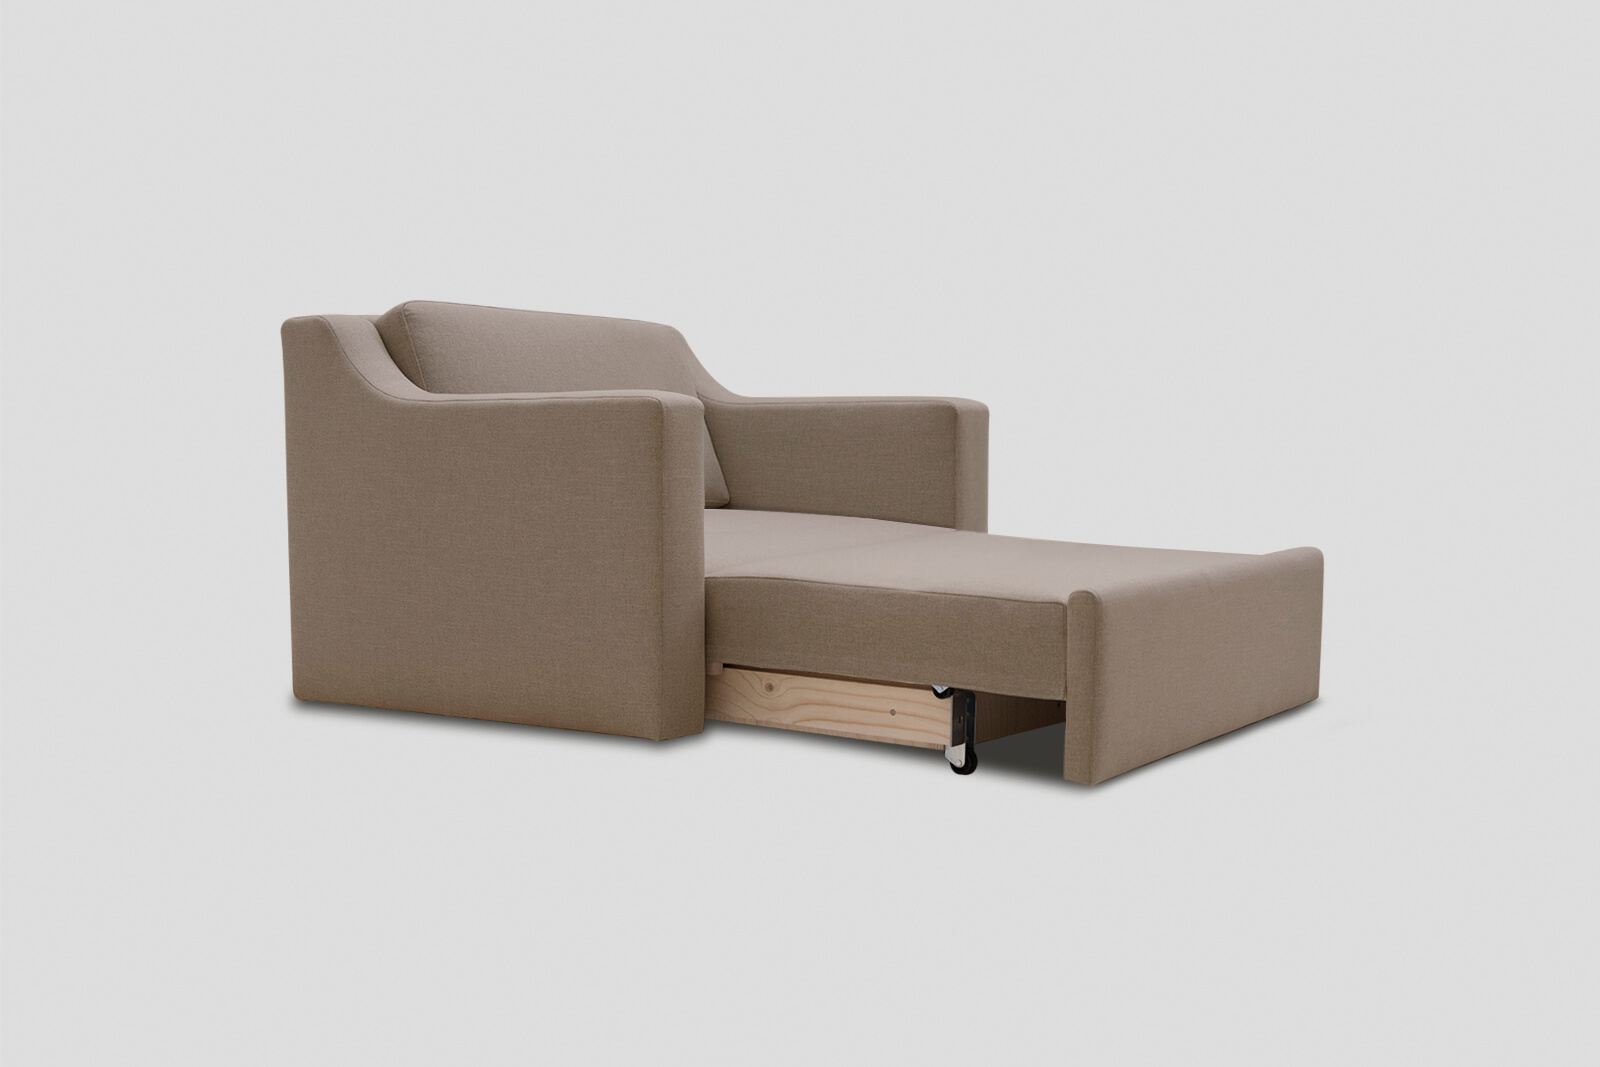 HBSB02-single-sofa-bed-husk-3q-daybed